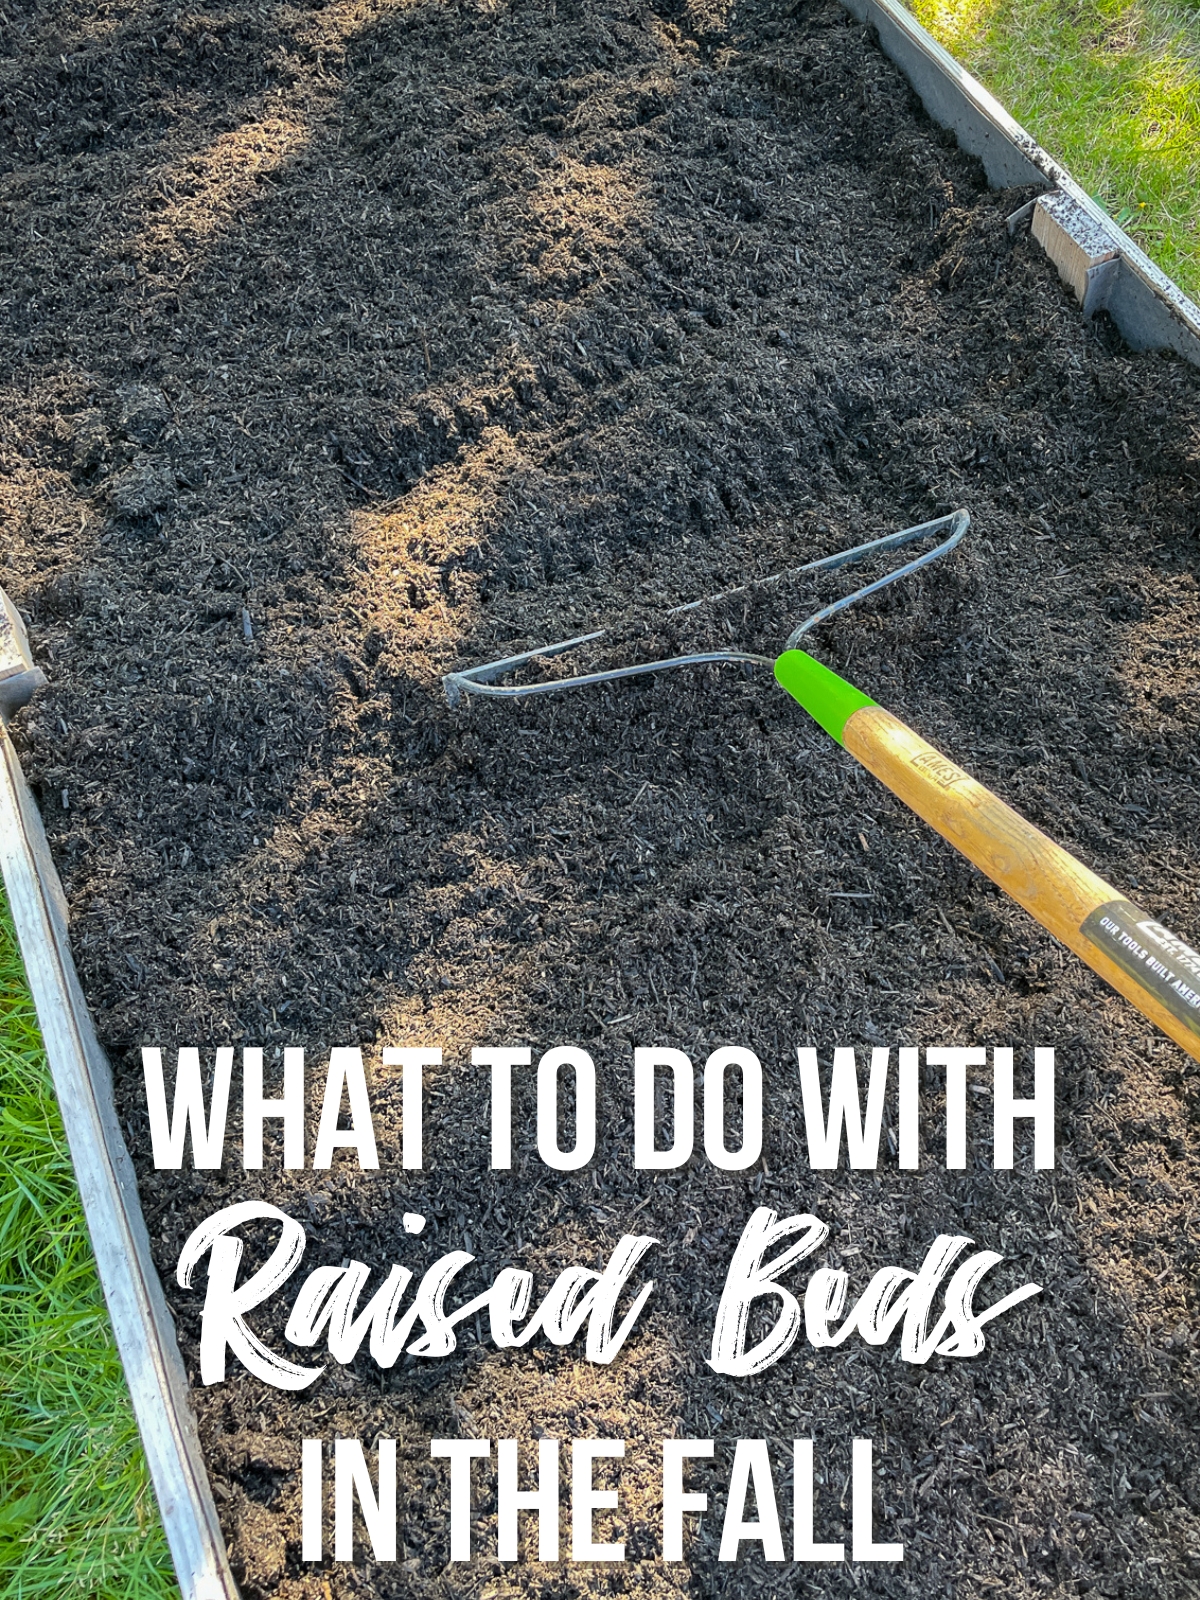 'What to do with raised beds in the fall' text overlay on image of raking compost into a raised bed